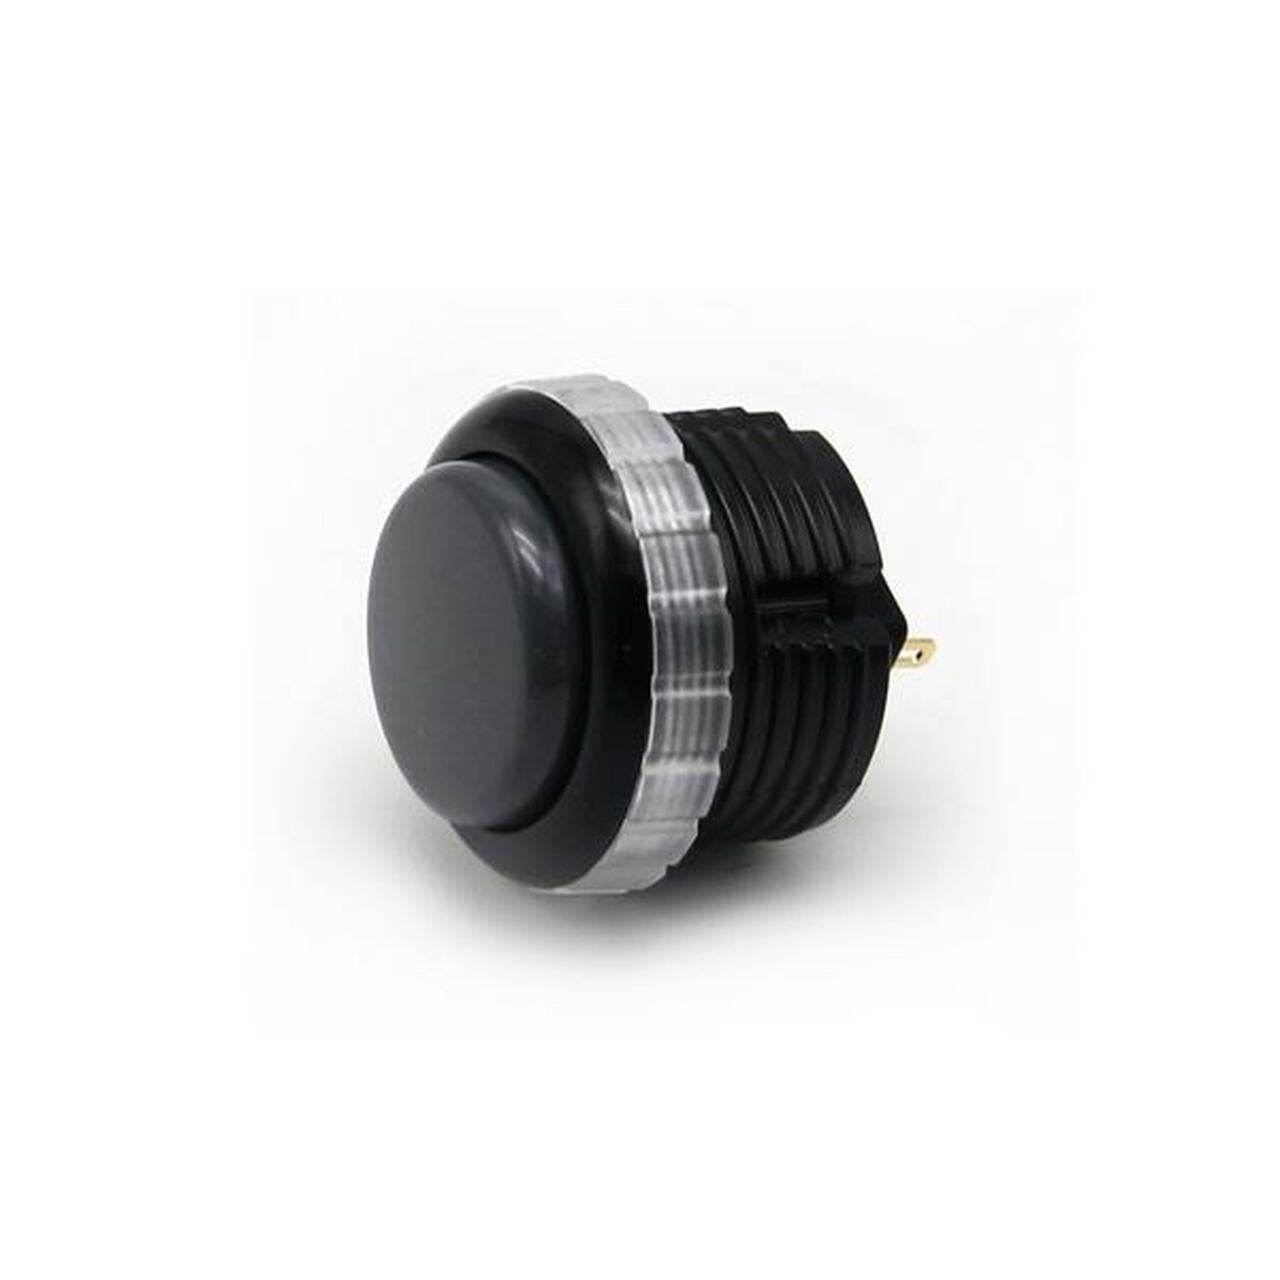 Qanba Gravity Solid Colour 30mm Mechanical Pushbutton (Black with Grey Center)